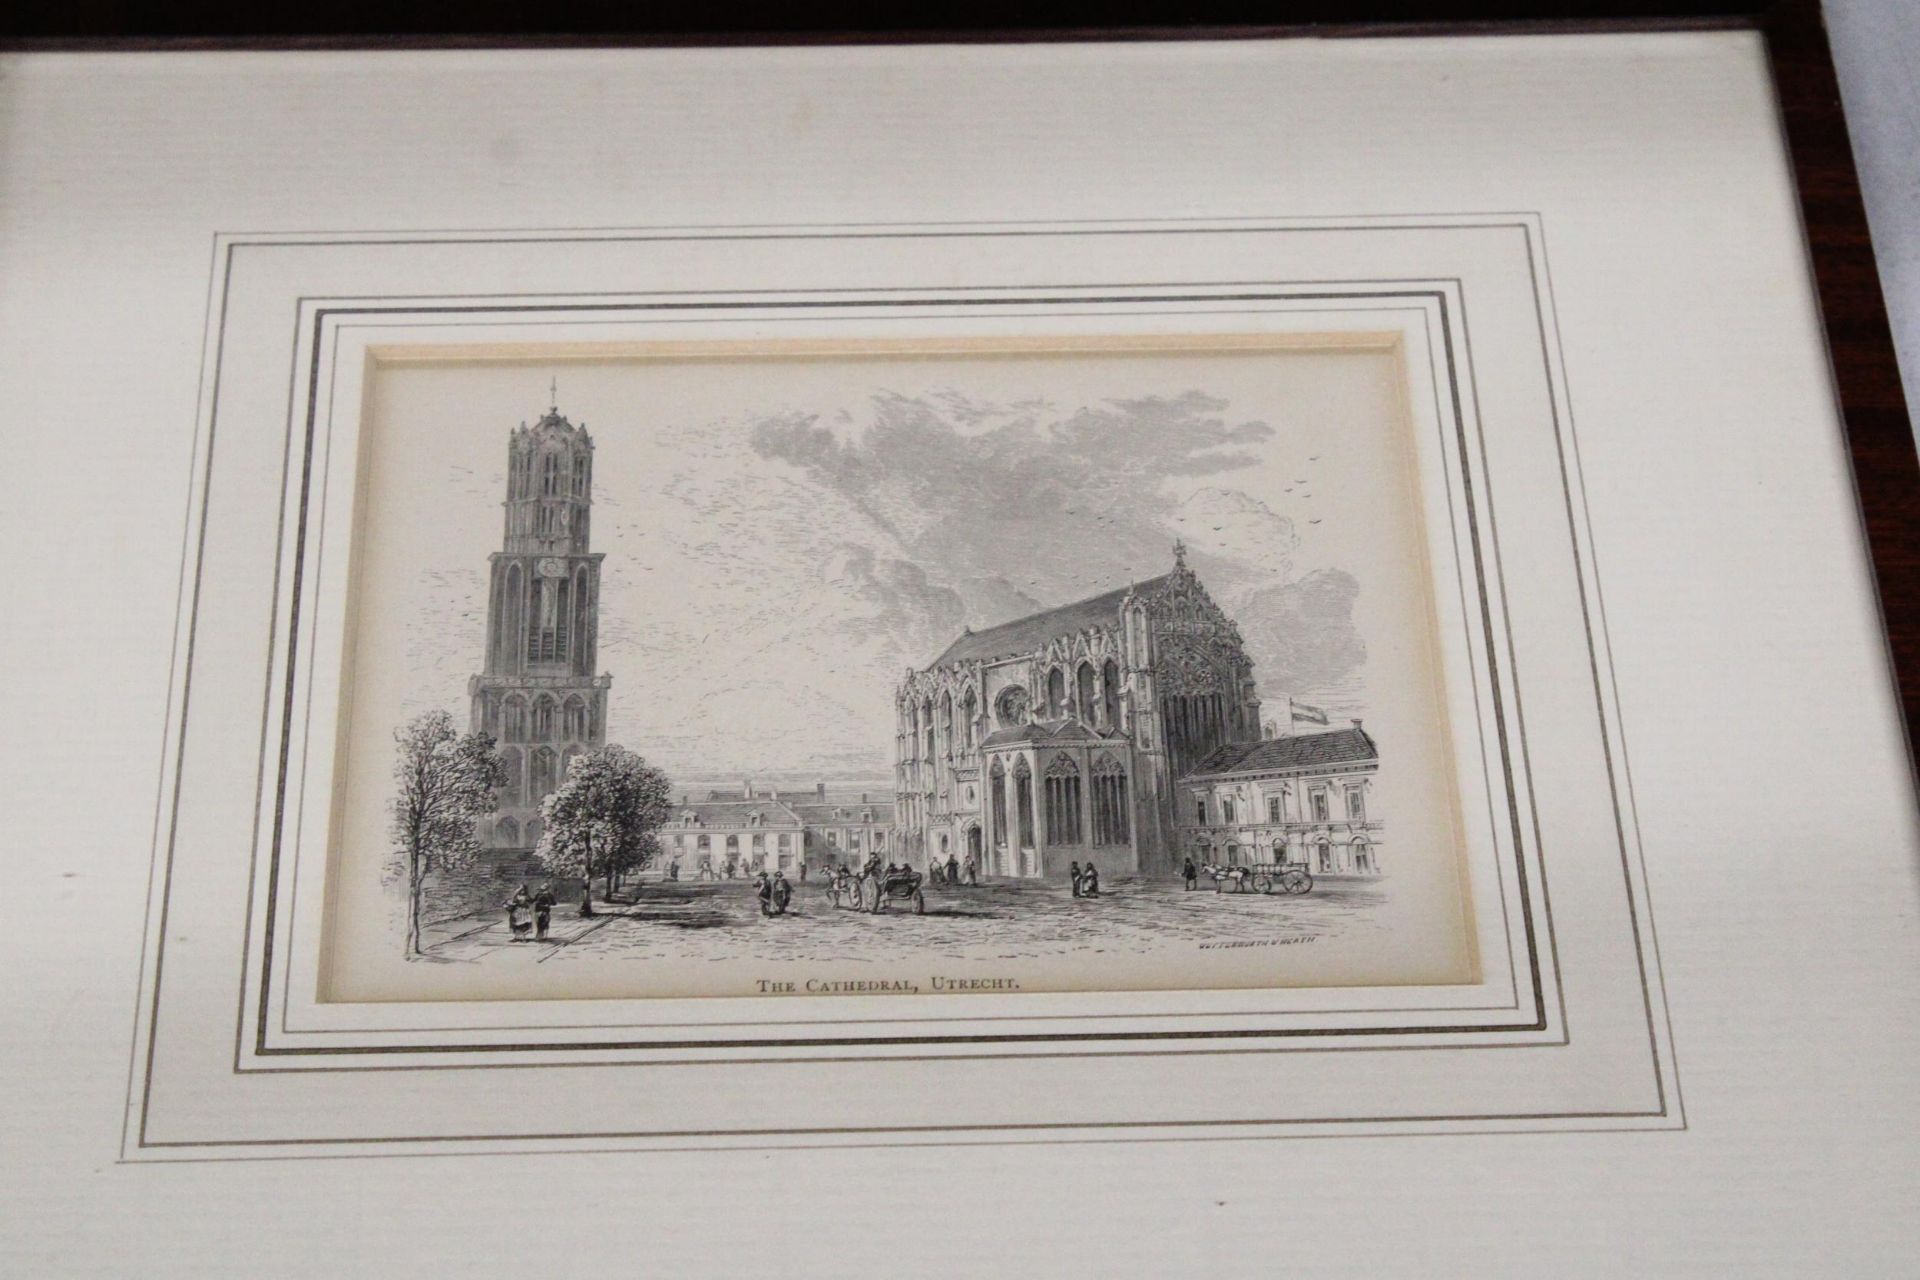 TWO FRAMED PRINTS OF THE CATHEDRAL UTRECHT AND VIEW ON THE CANAL, UTRETCHT - Image 5 of 5